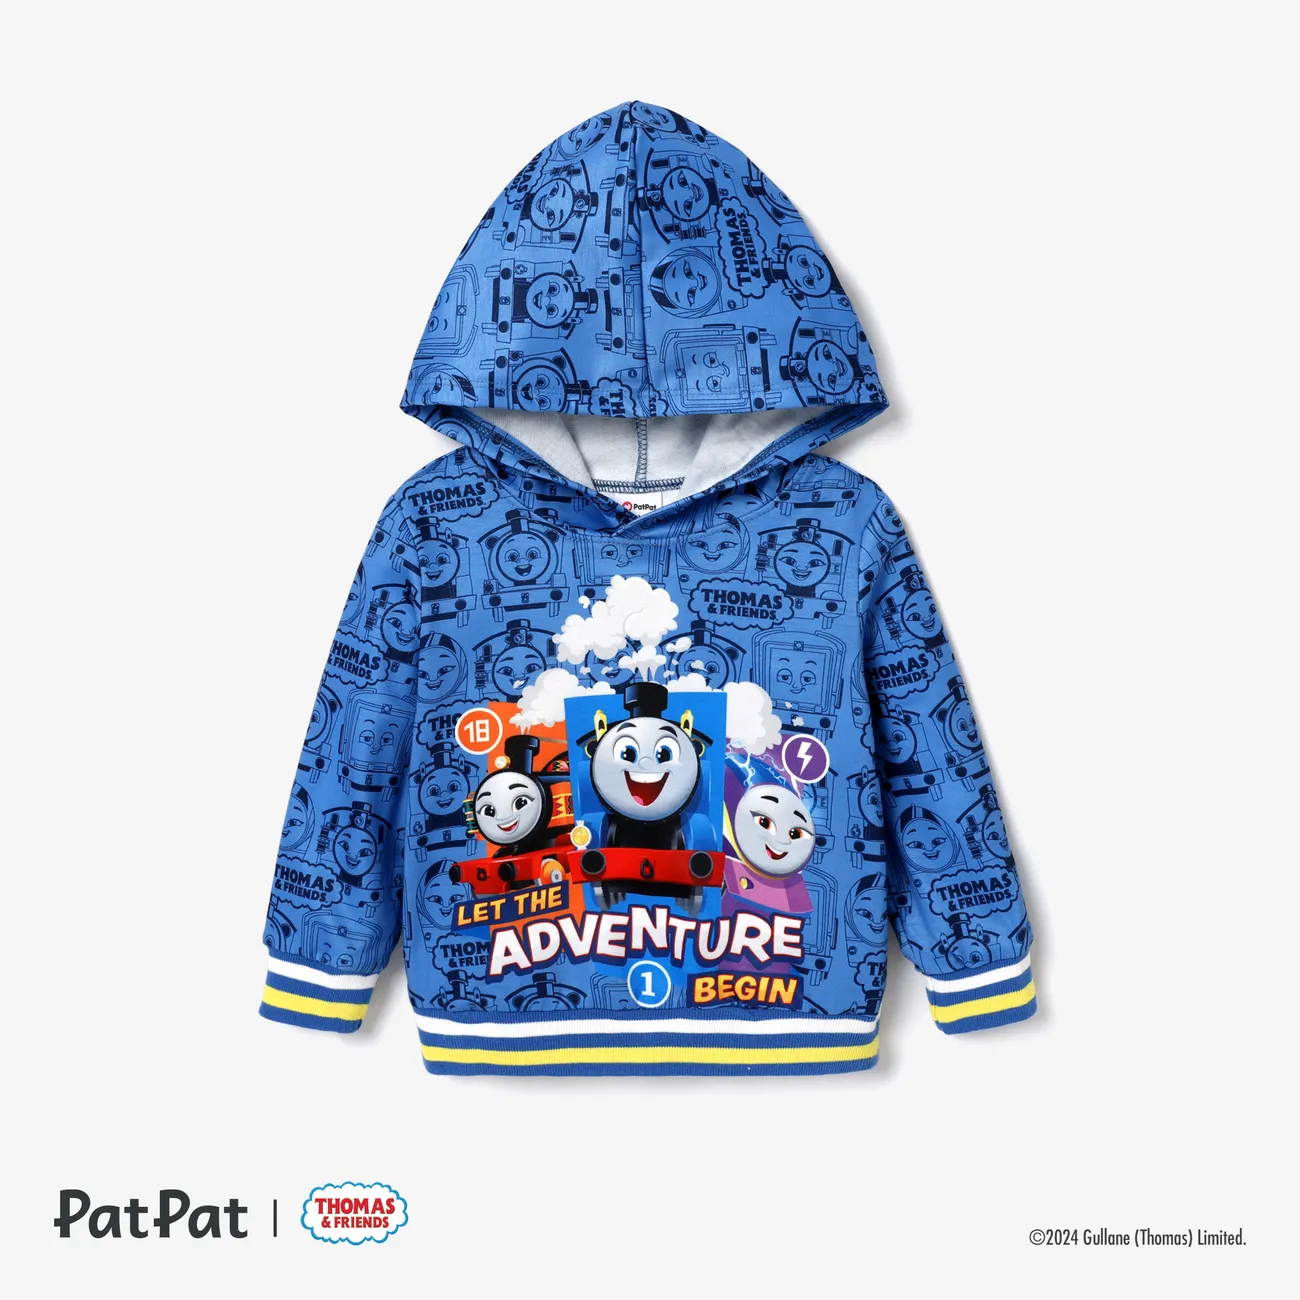 Thomas & Friends Toddler Boys Long-sleeve Hooded Top  Blue big image 1